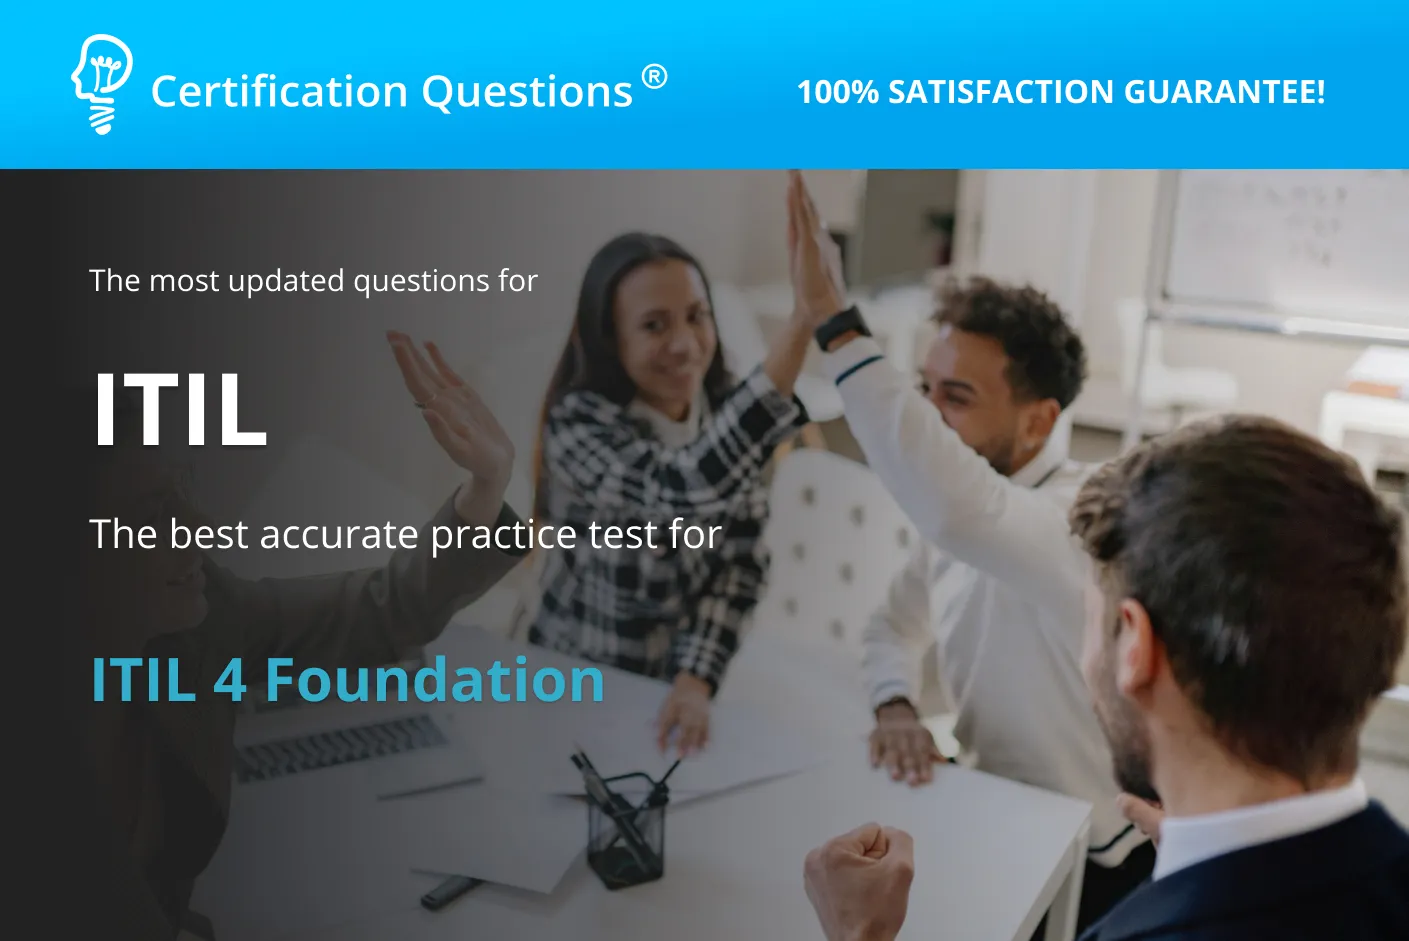 This guide is related to Itil 4 Foundation Practice exam in the USA